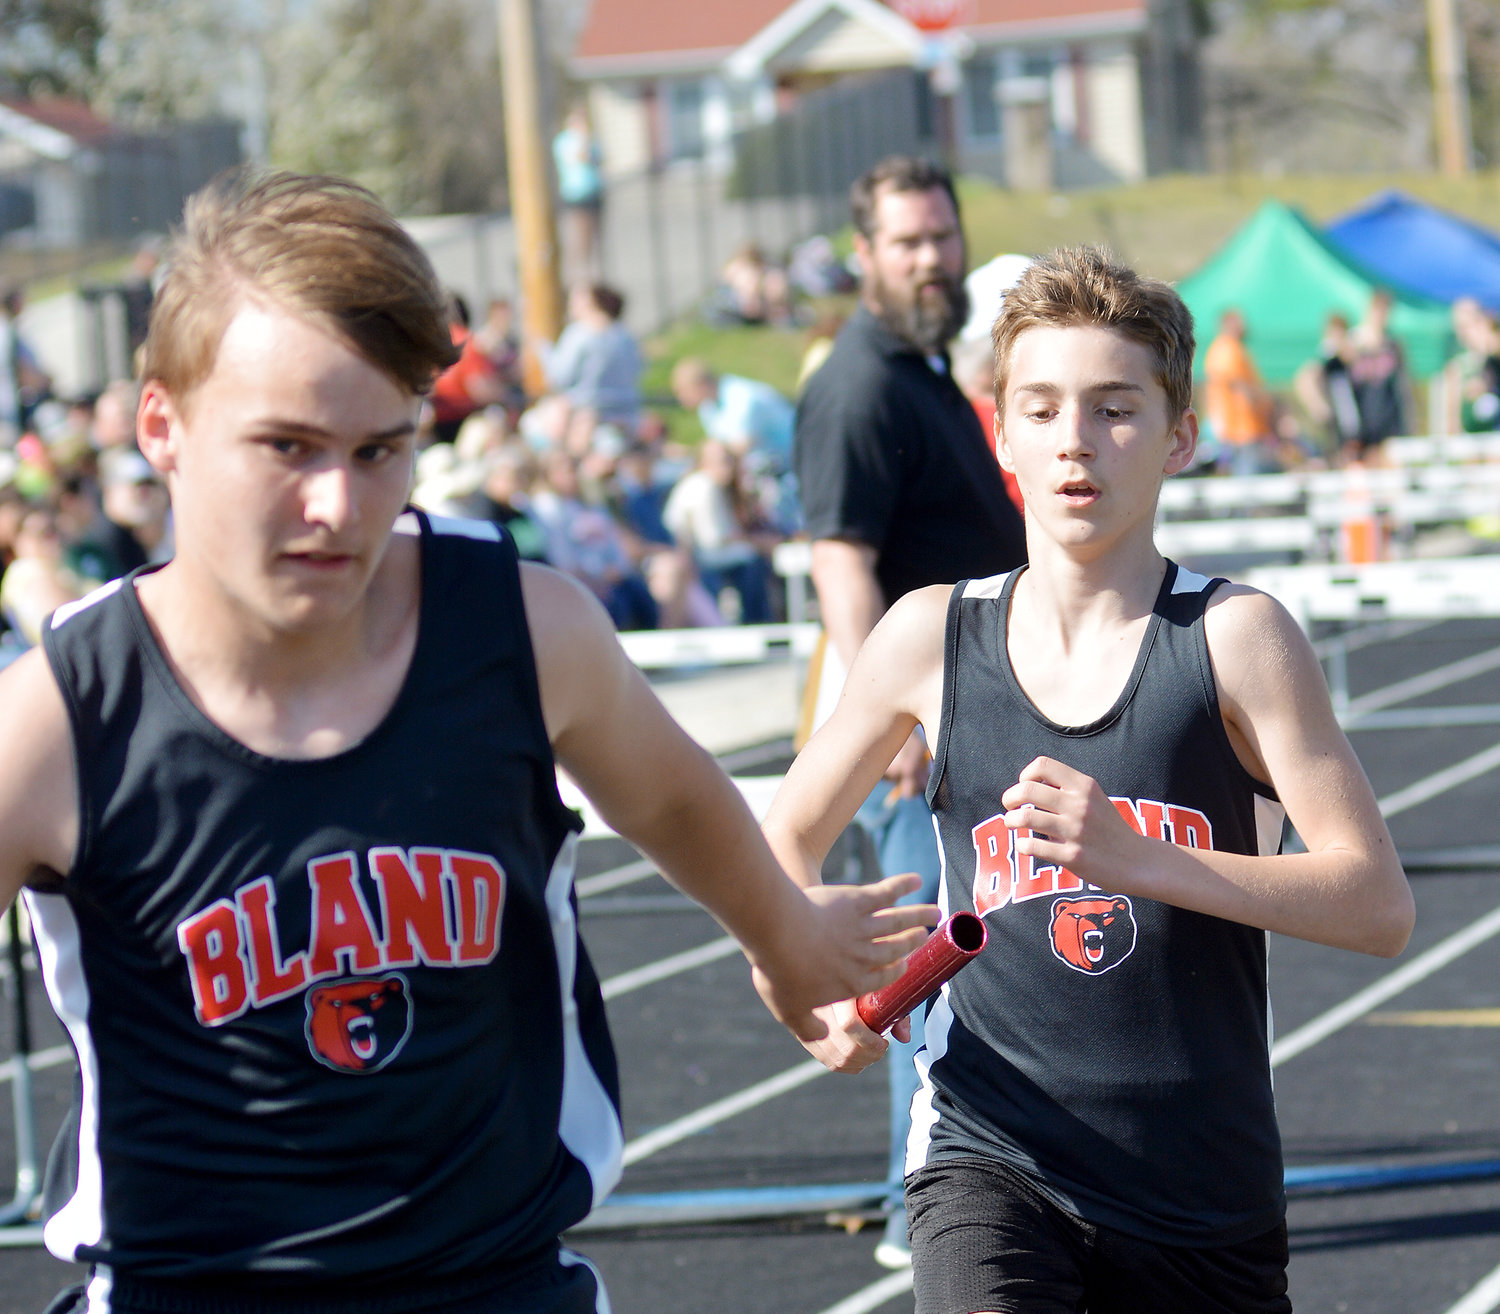 Miles Frey (far left) reaches back for the baton from Malachi Fredendall for Bland’s Bears during the boys 4x800-meter relay during the Vienna Middle School (VMS) Eagle Classic held at Vienna High School’s track.